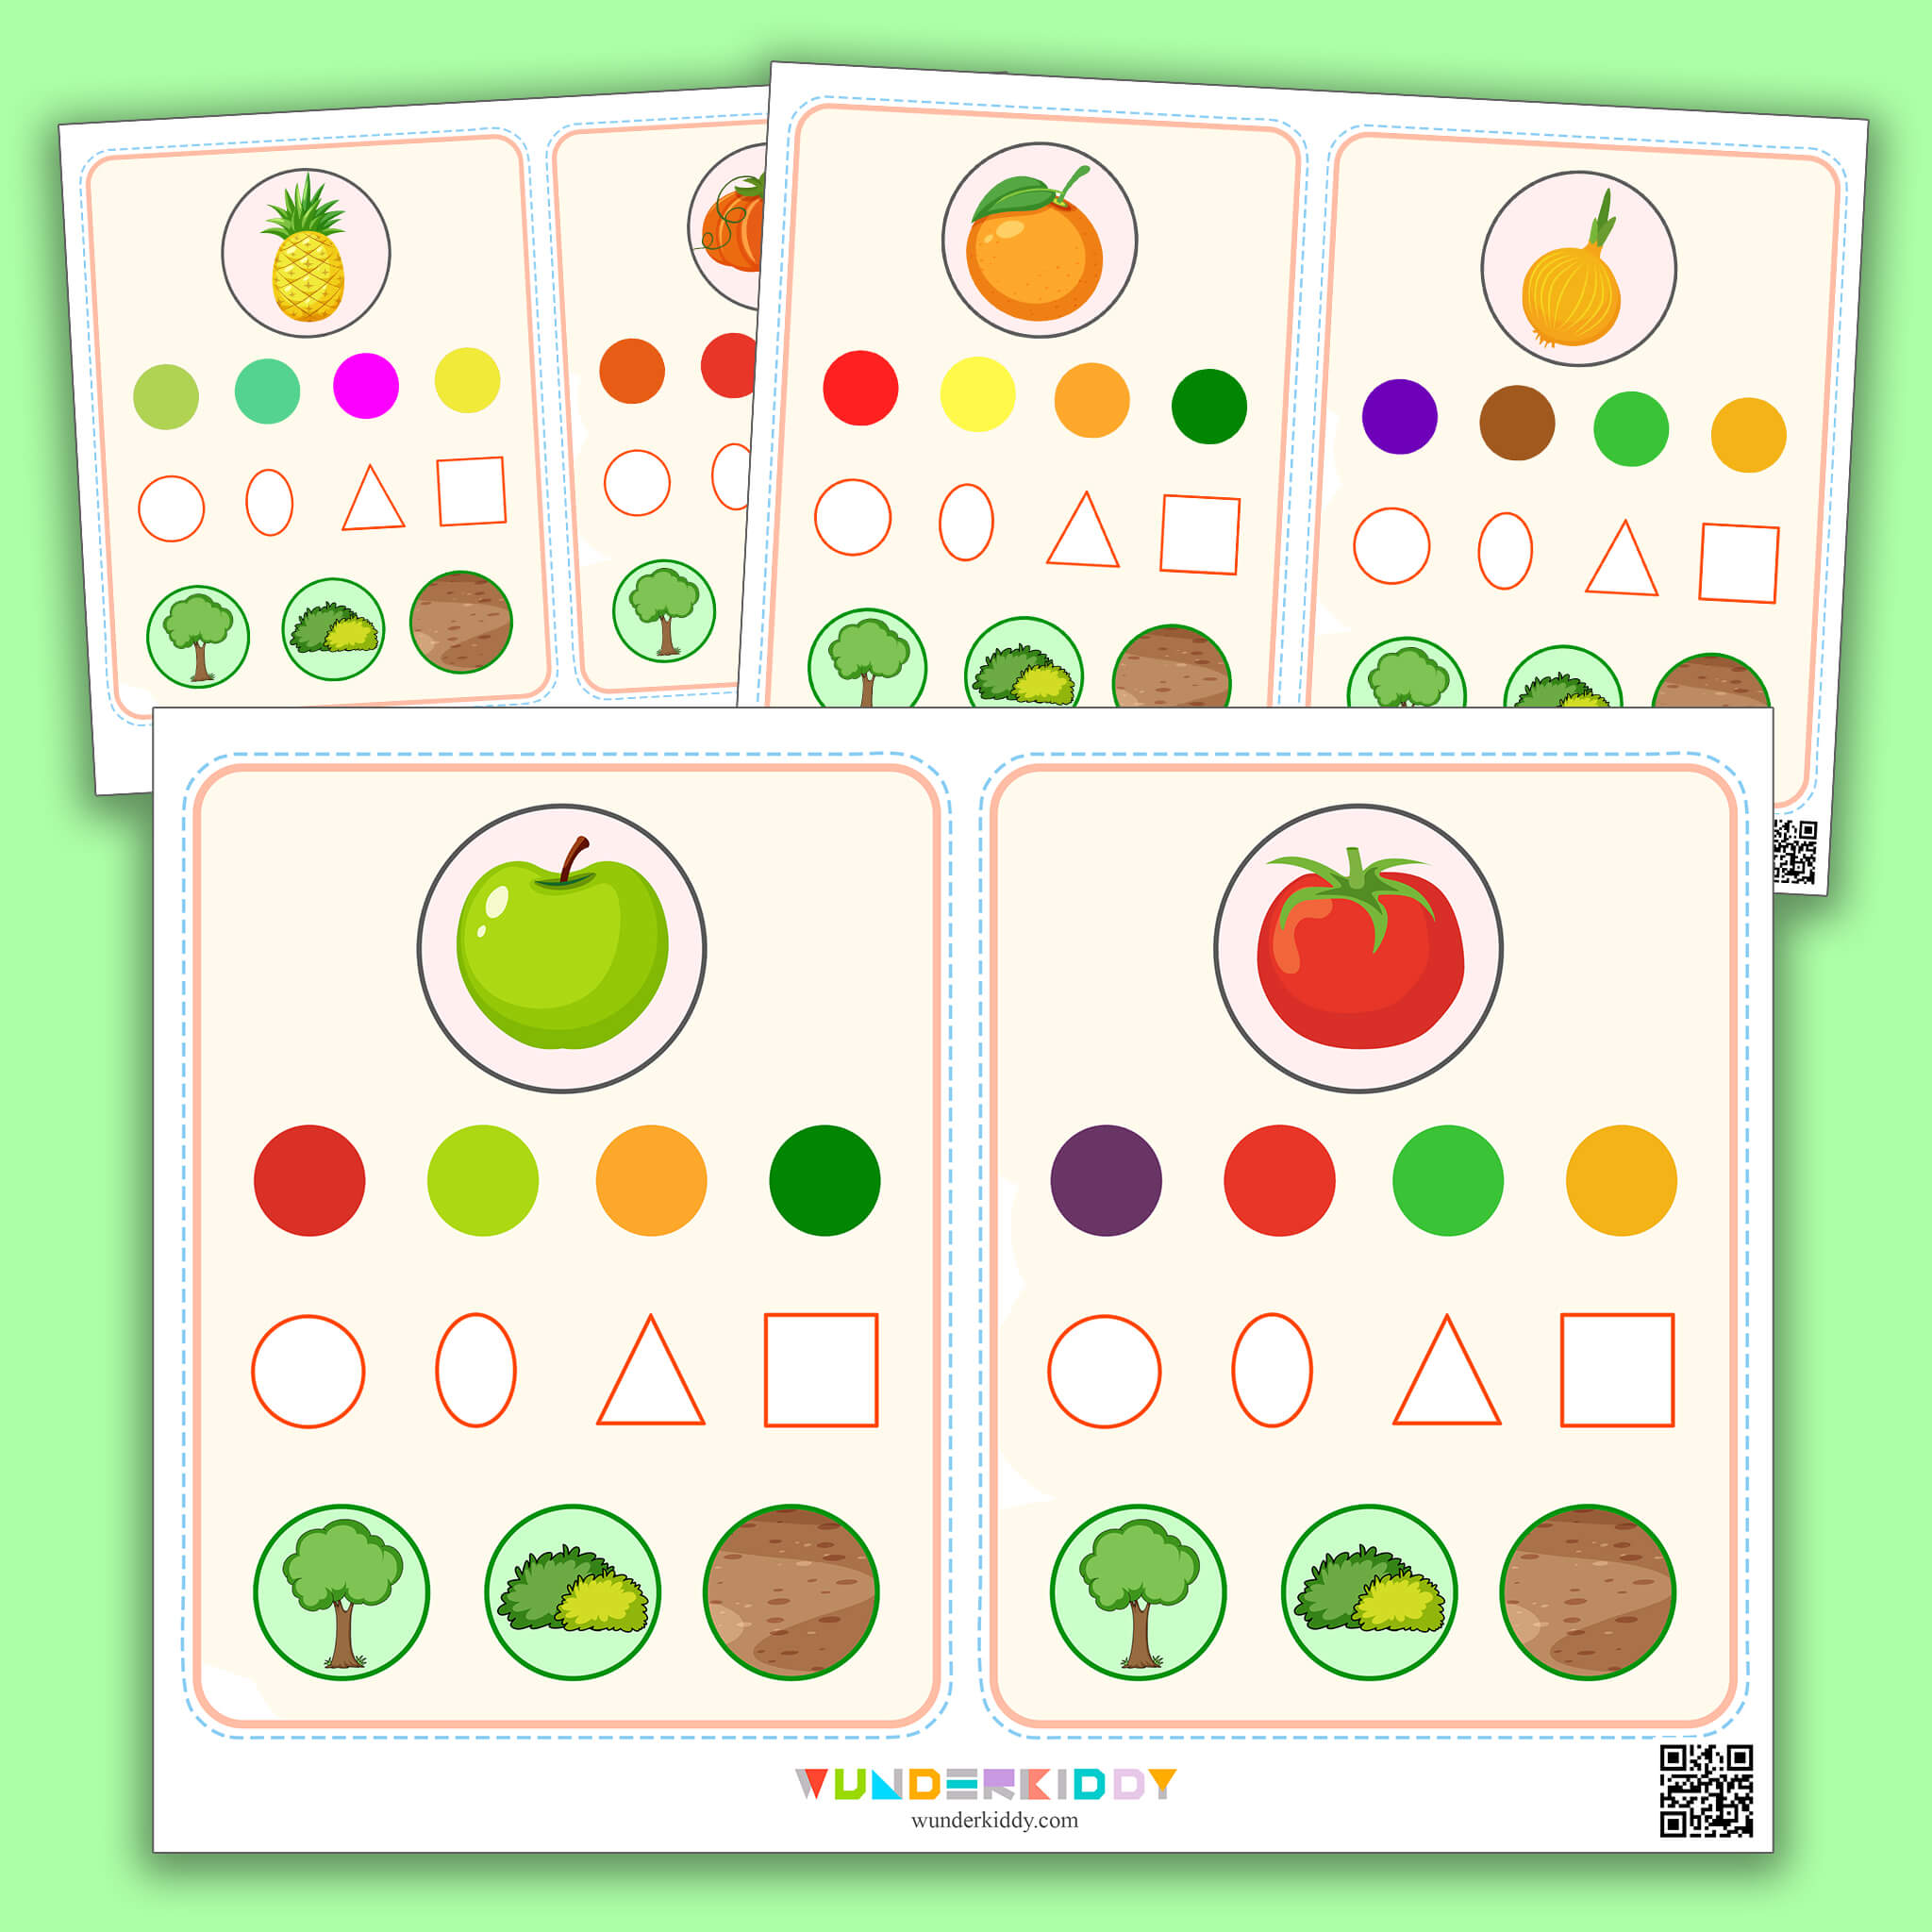 Flashcards Fruits and Vegetables to Learn Colors in Kindergarten